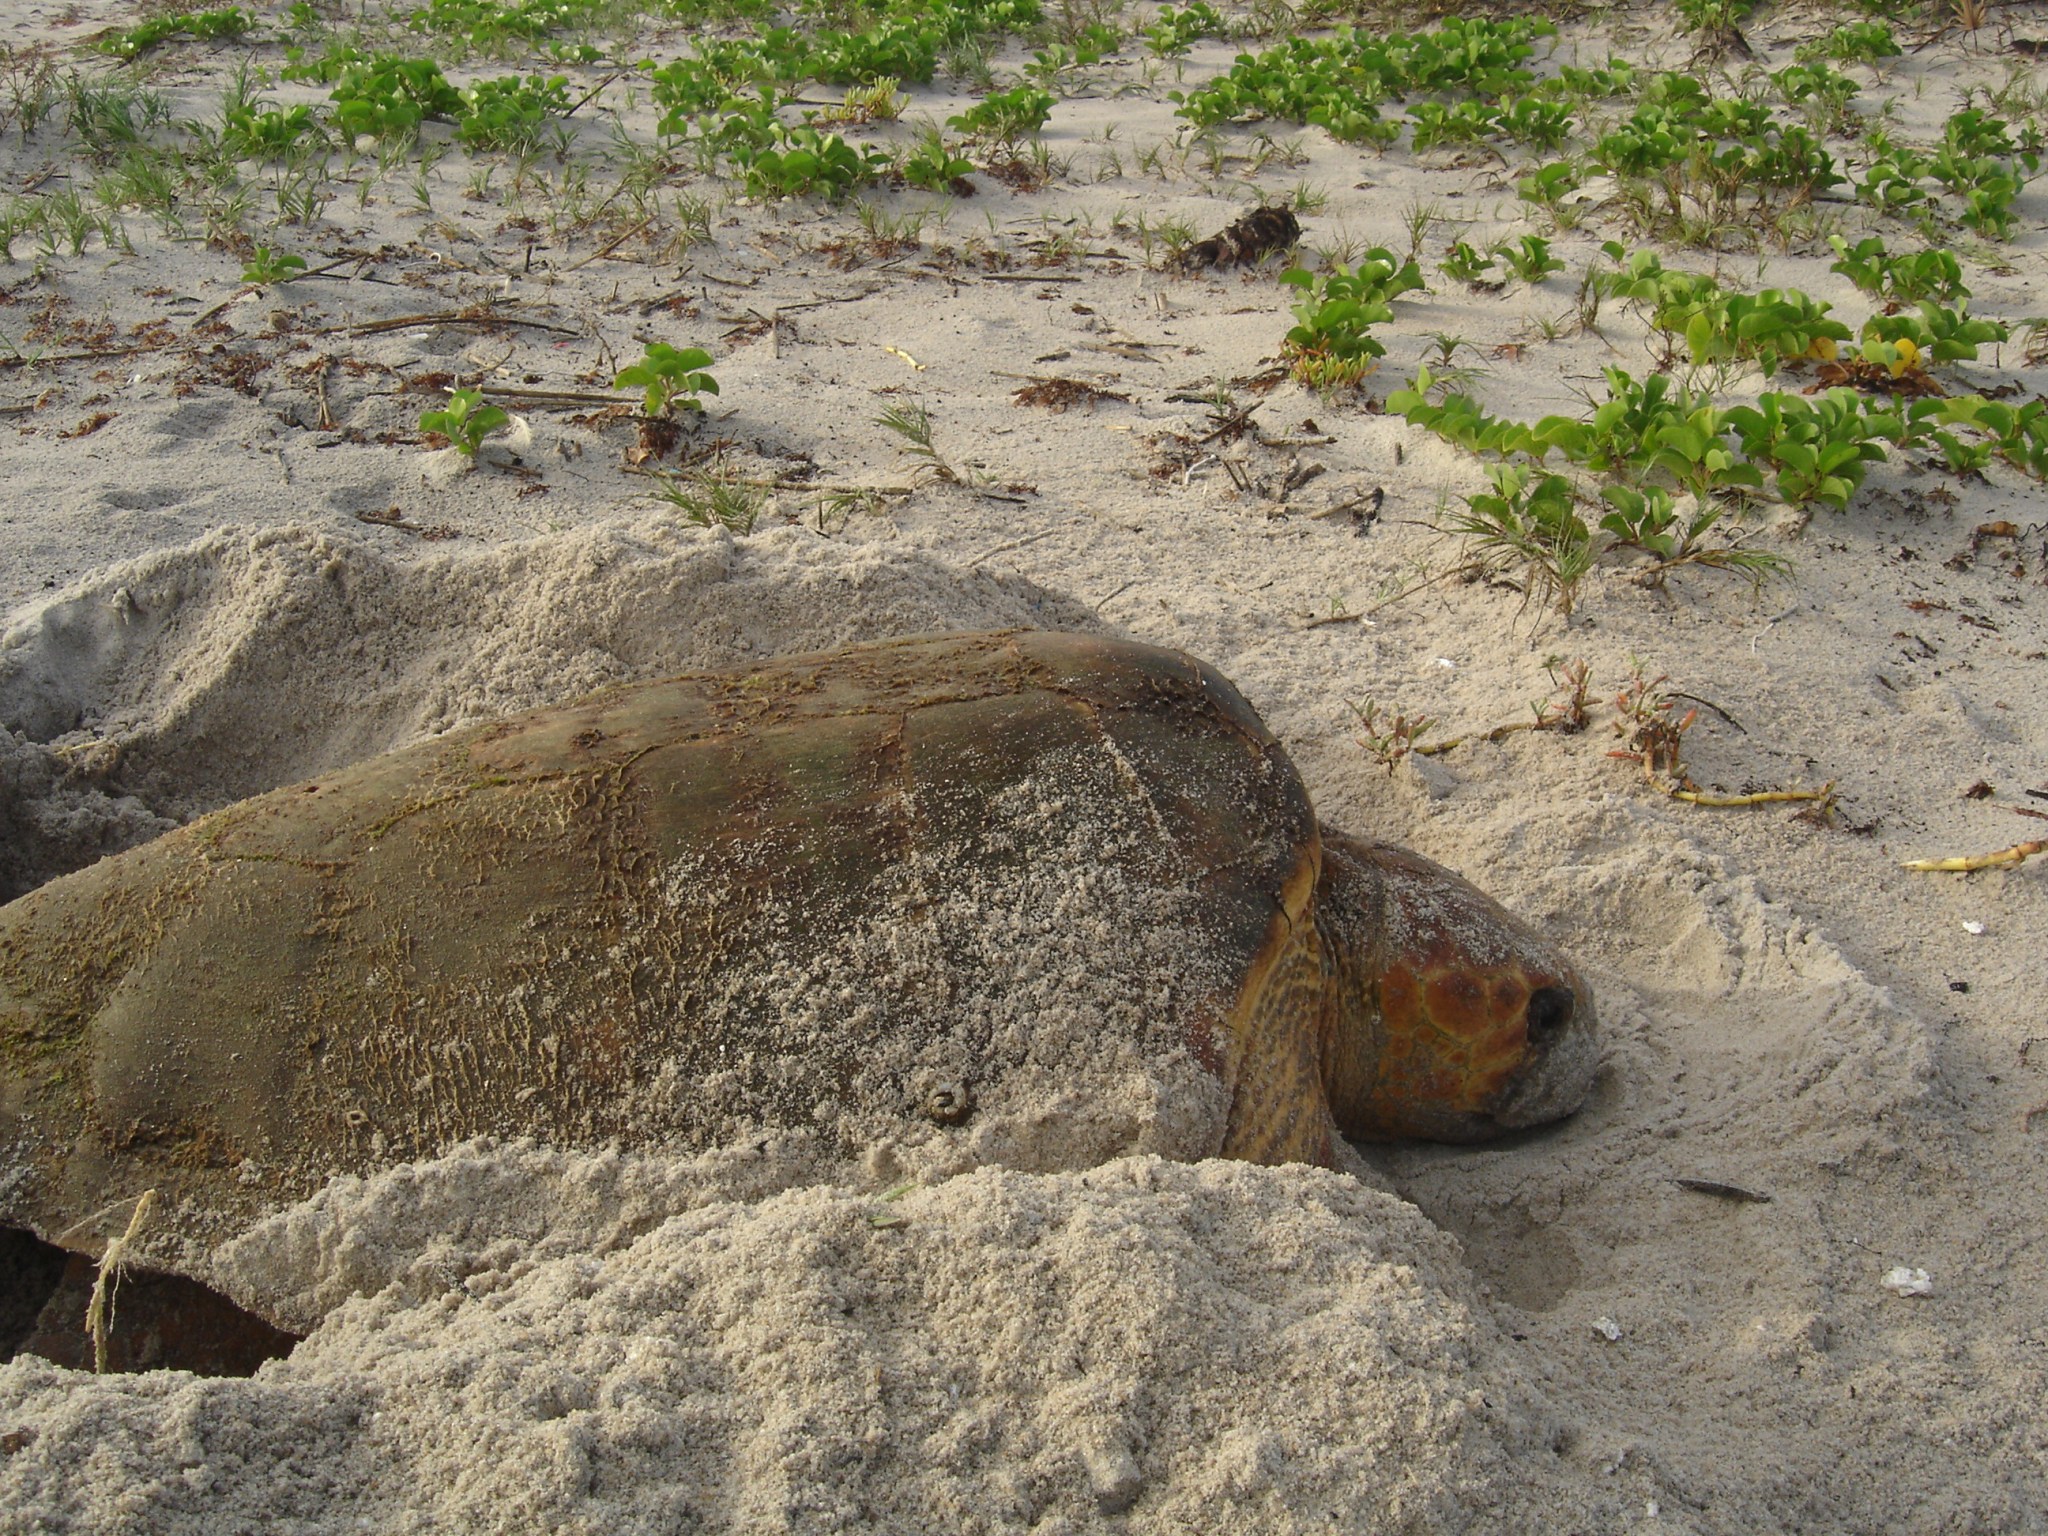 An adult loggerhead turtle is photographed on the beach at NASA's Kennedy Space Center in Florida.